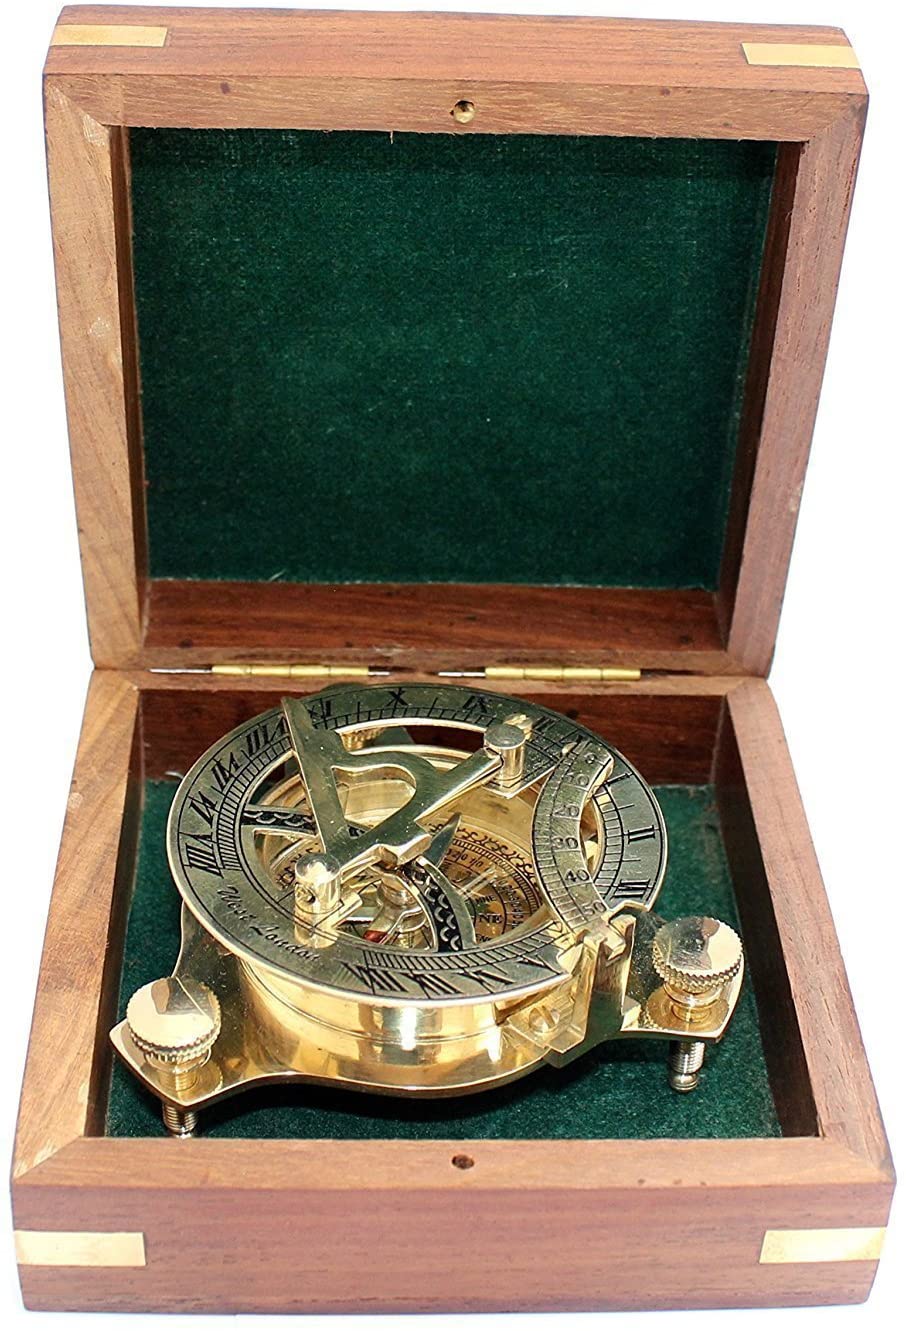 Details about   Antique Vintage Brass Cox London Sundial Compass Wooden Box Equation Of Time Box 